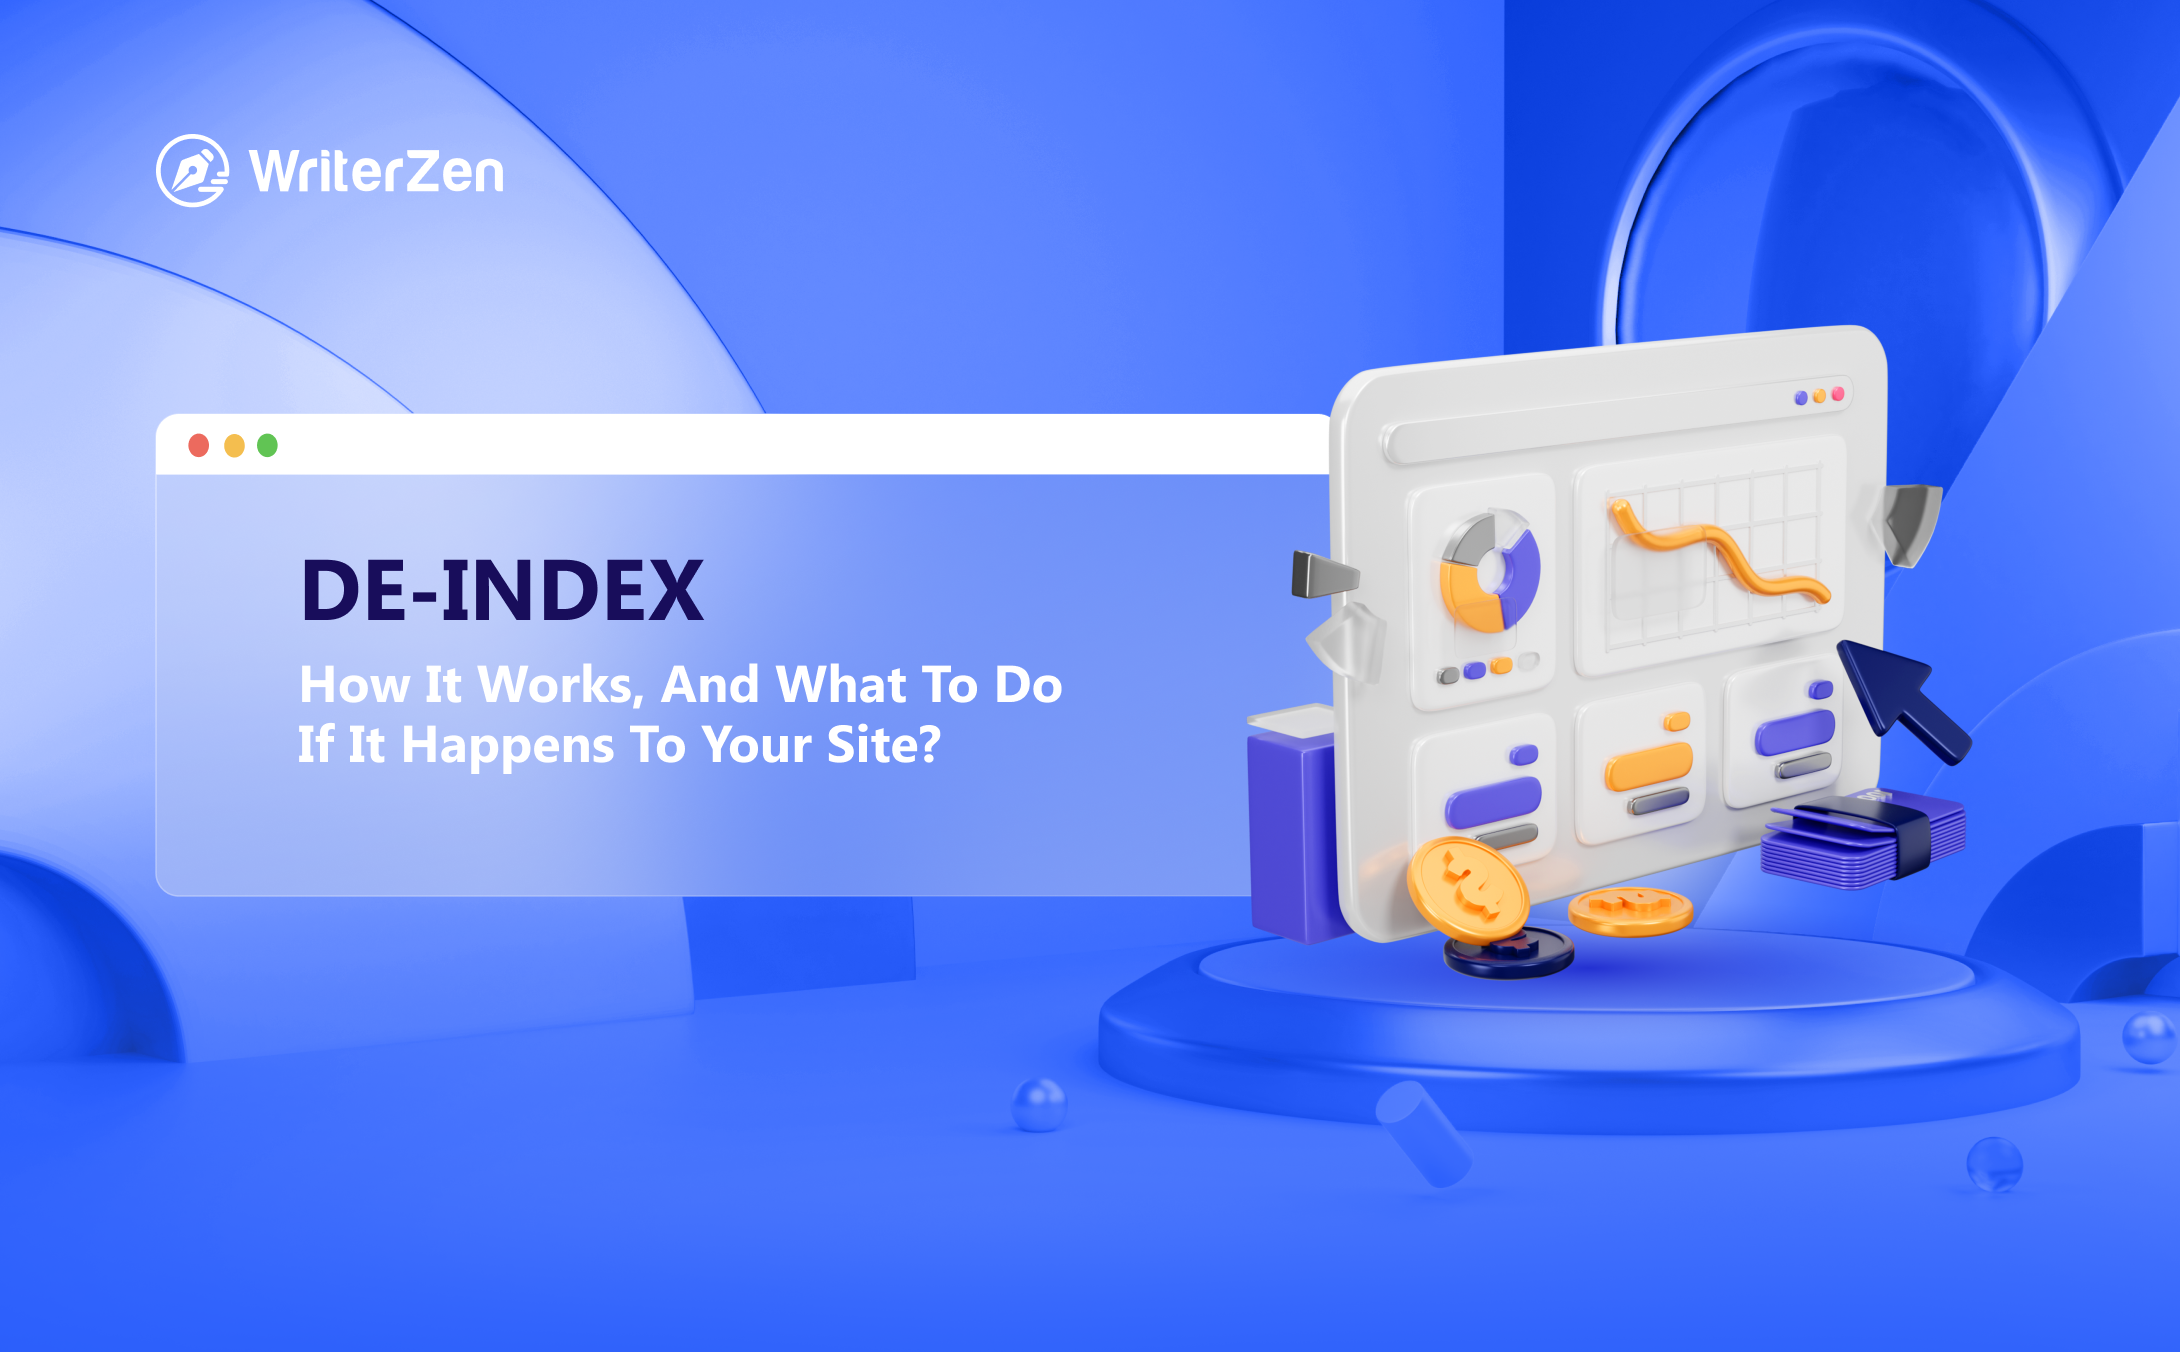 De-Index: How It Works, And What To Do If It Happens To Your Site